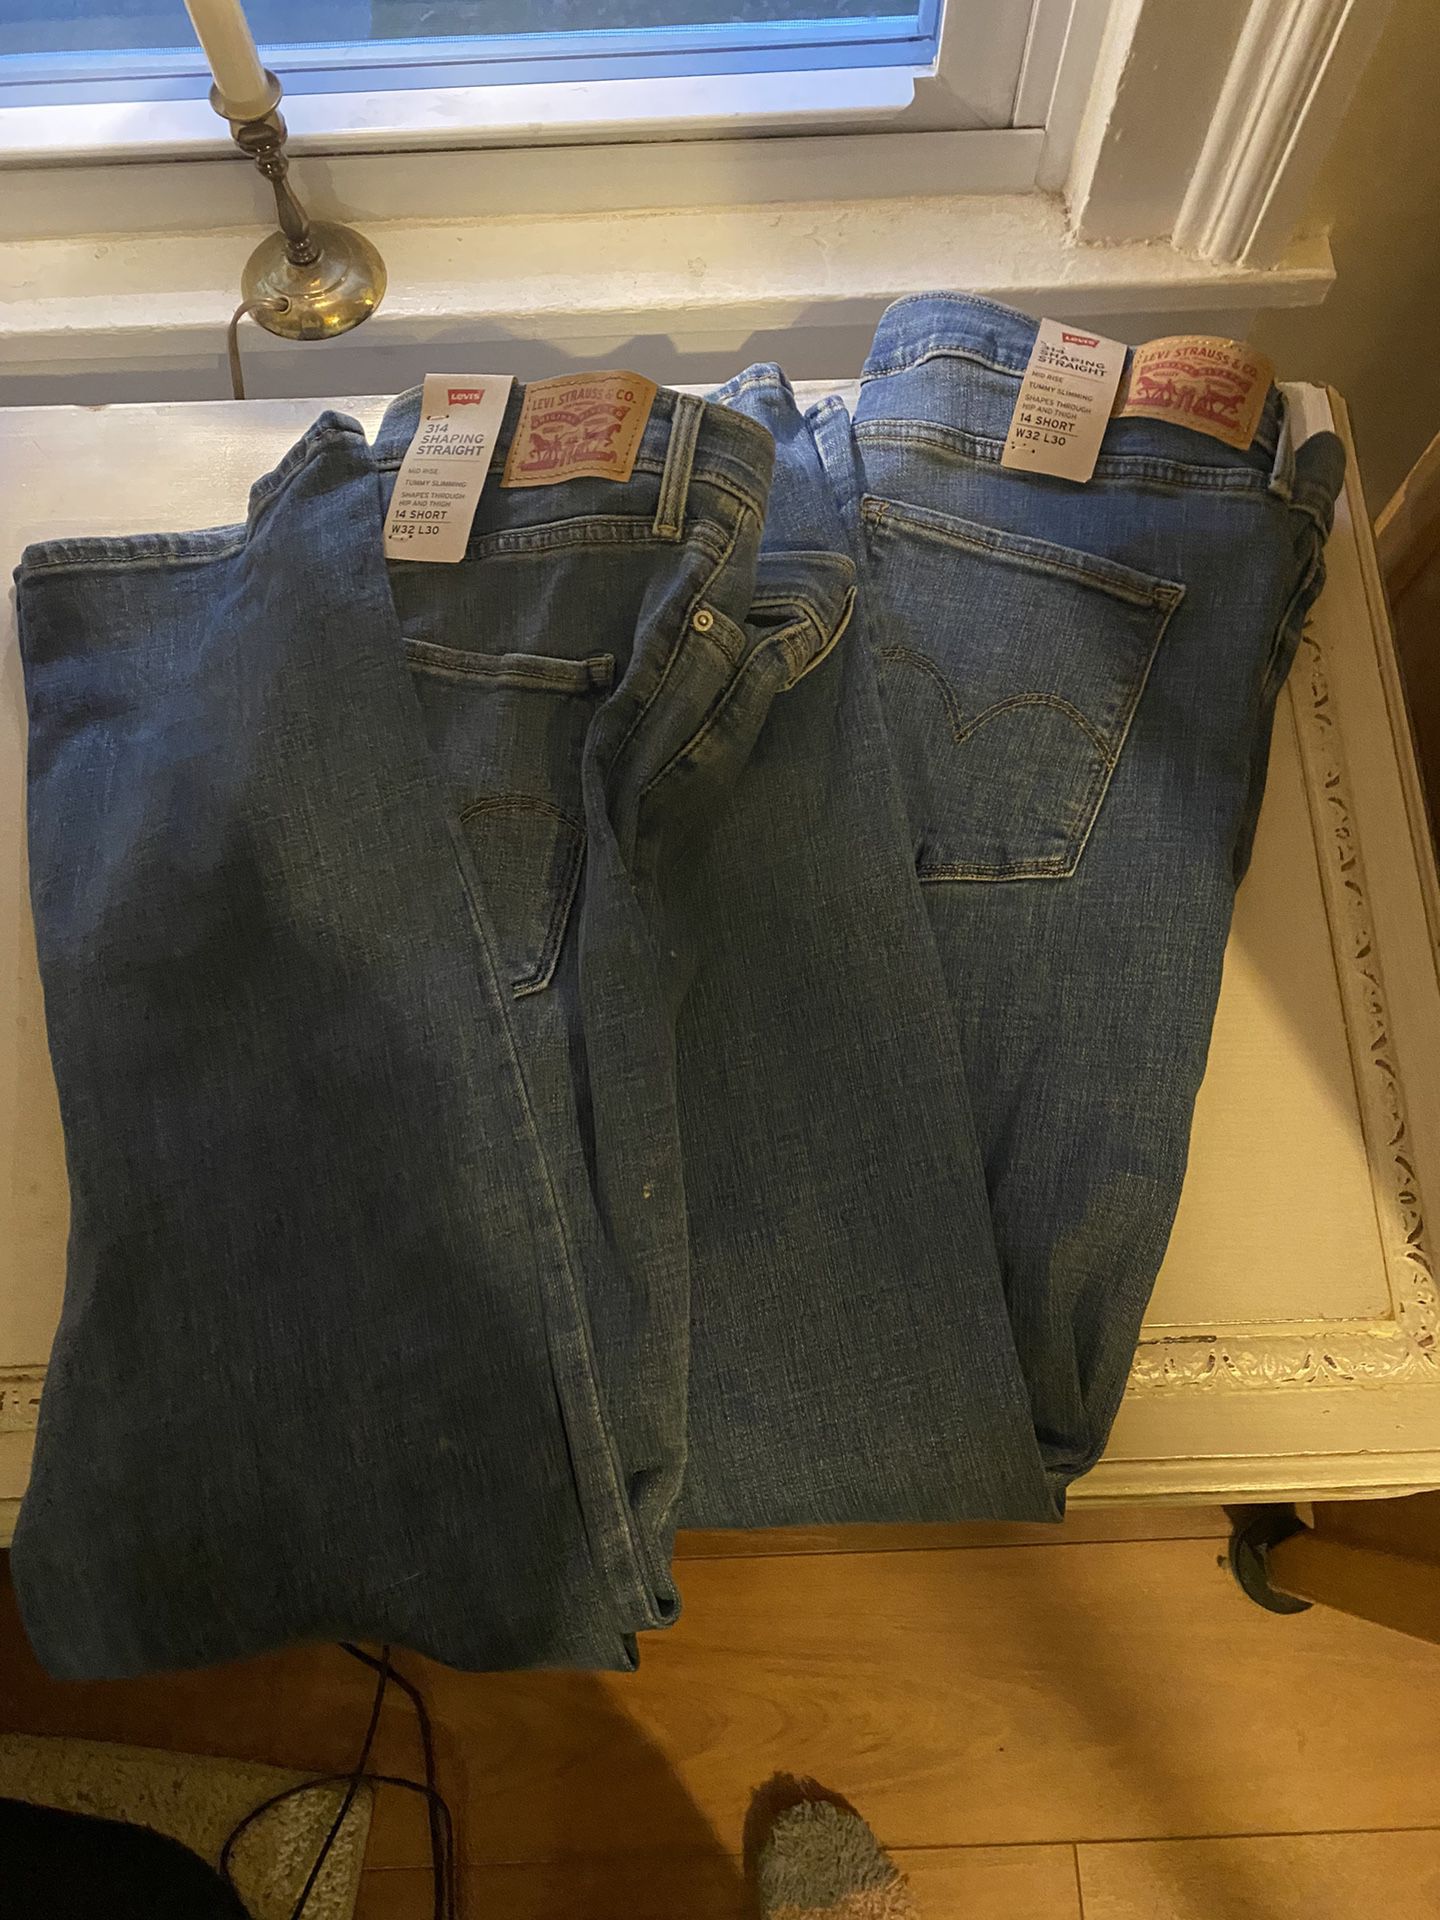 NWT Two Pair Woman’s Levi’s 314 Shaping Straight Mid Rise Jeans Size 14 Short-$25.00 Each